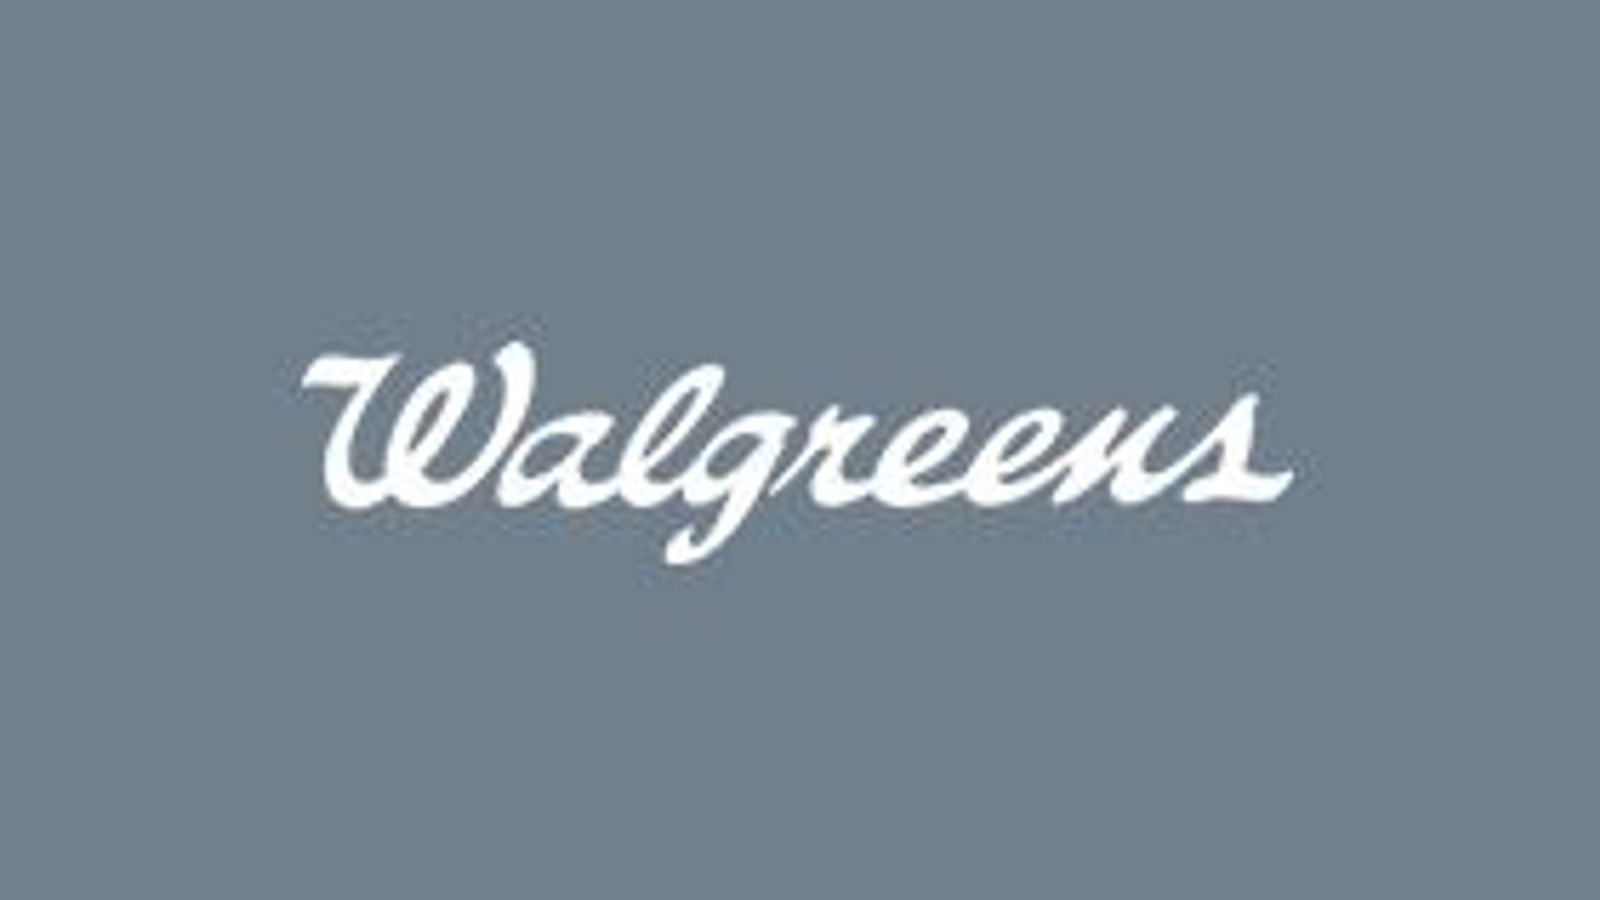 Walgreens creates a community of wellness for customers with a team of engaged, well-trained employees